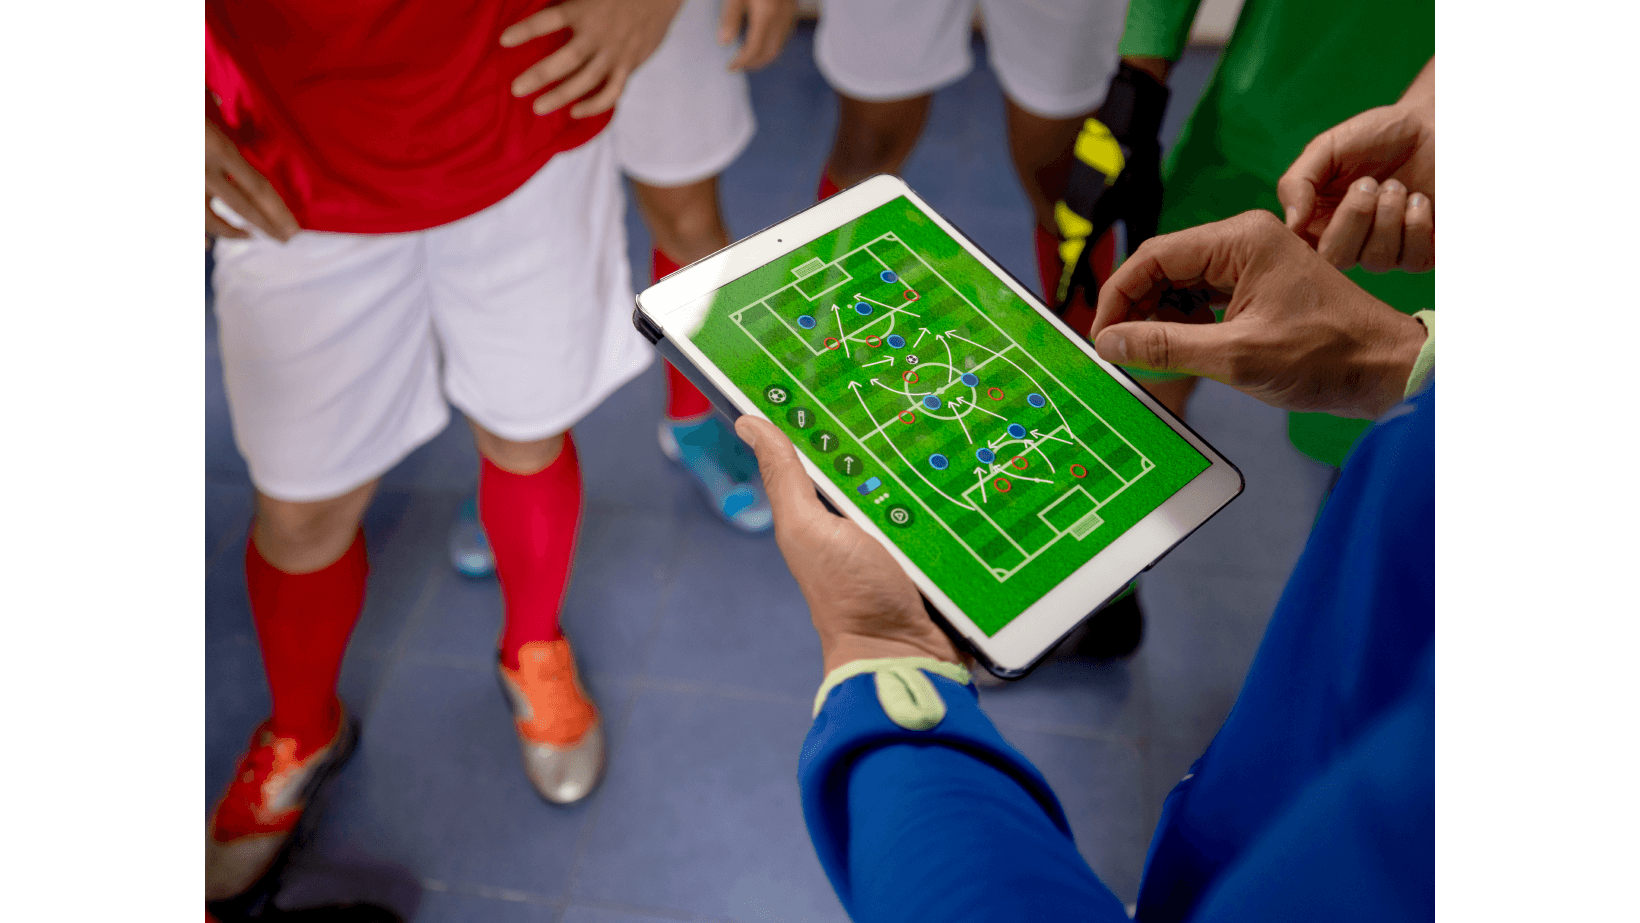 A Soccer coach reviewing game tactics plan on tablet with the team in the dressing room